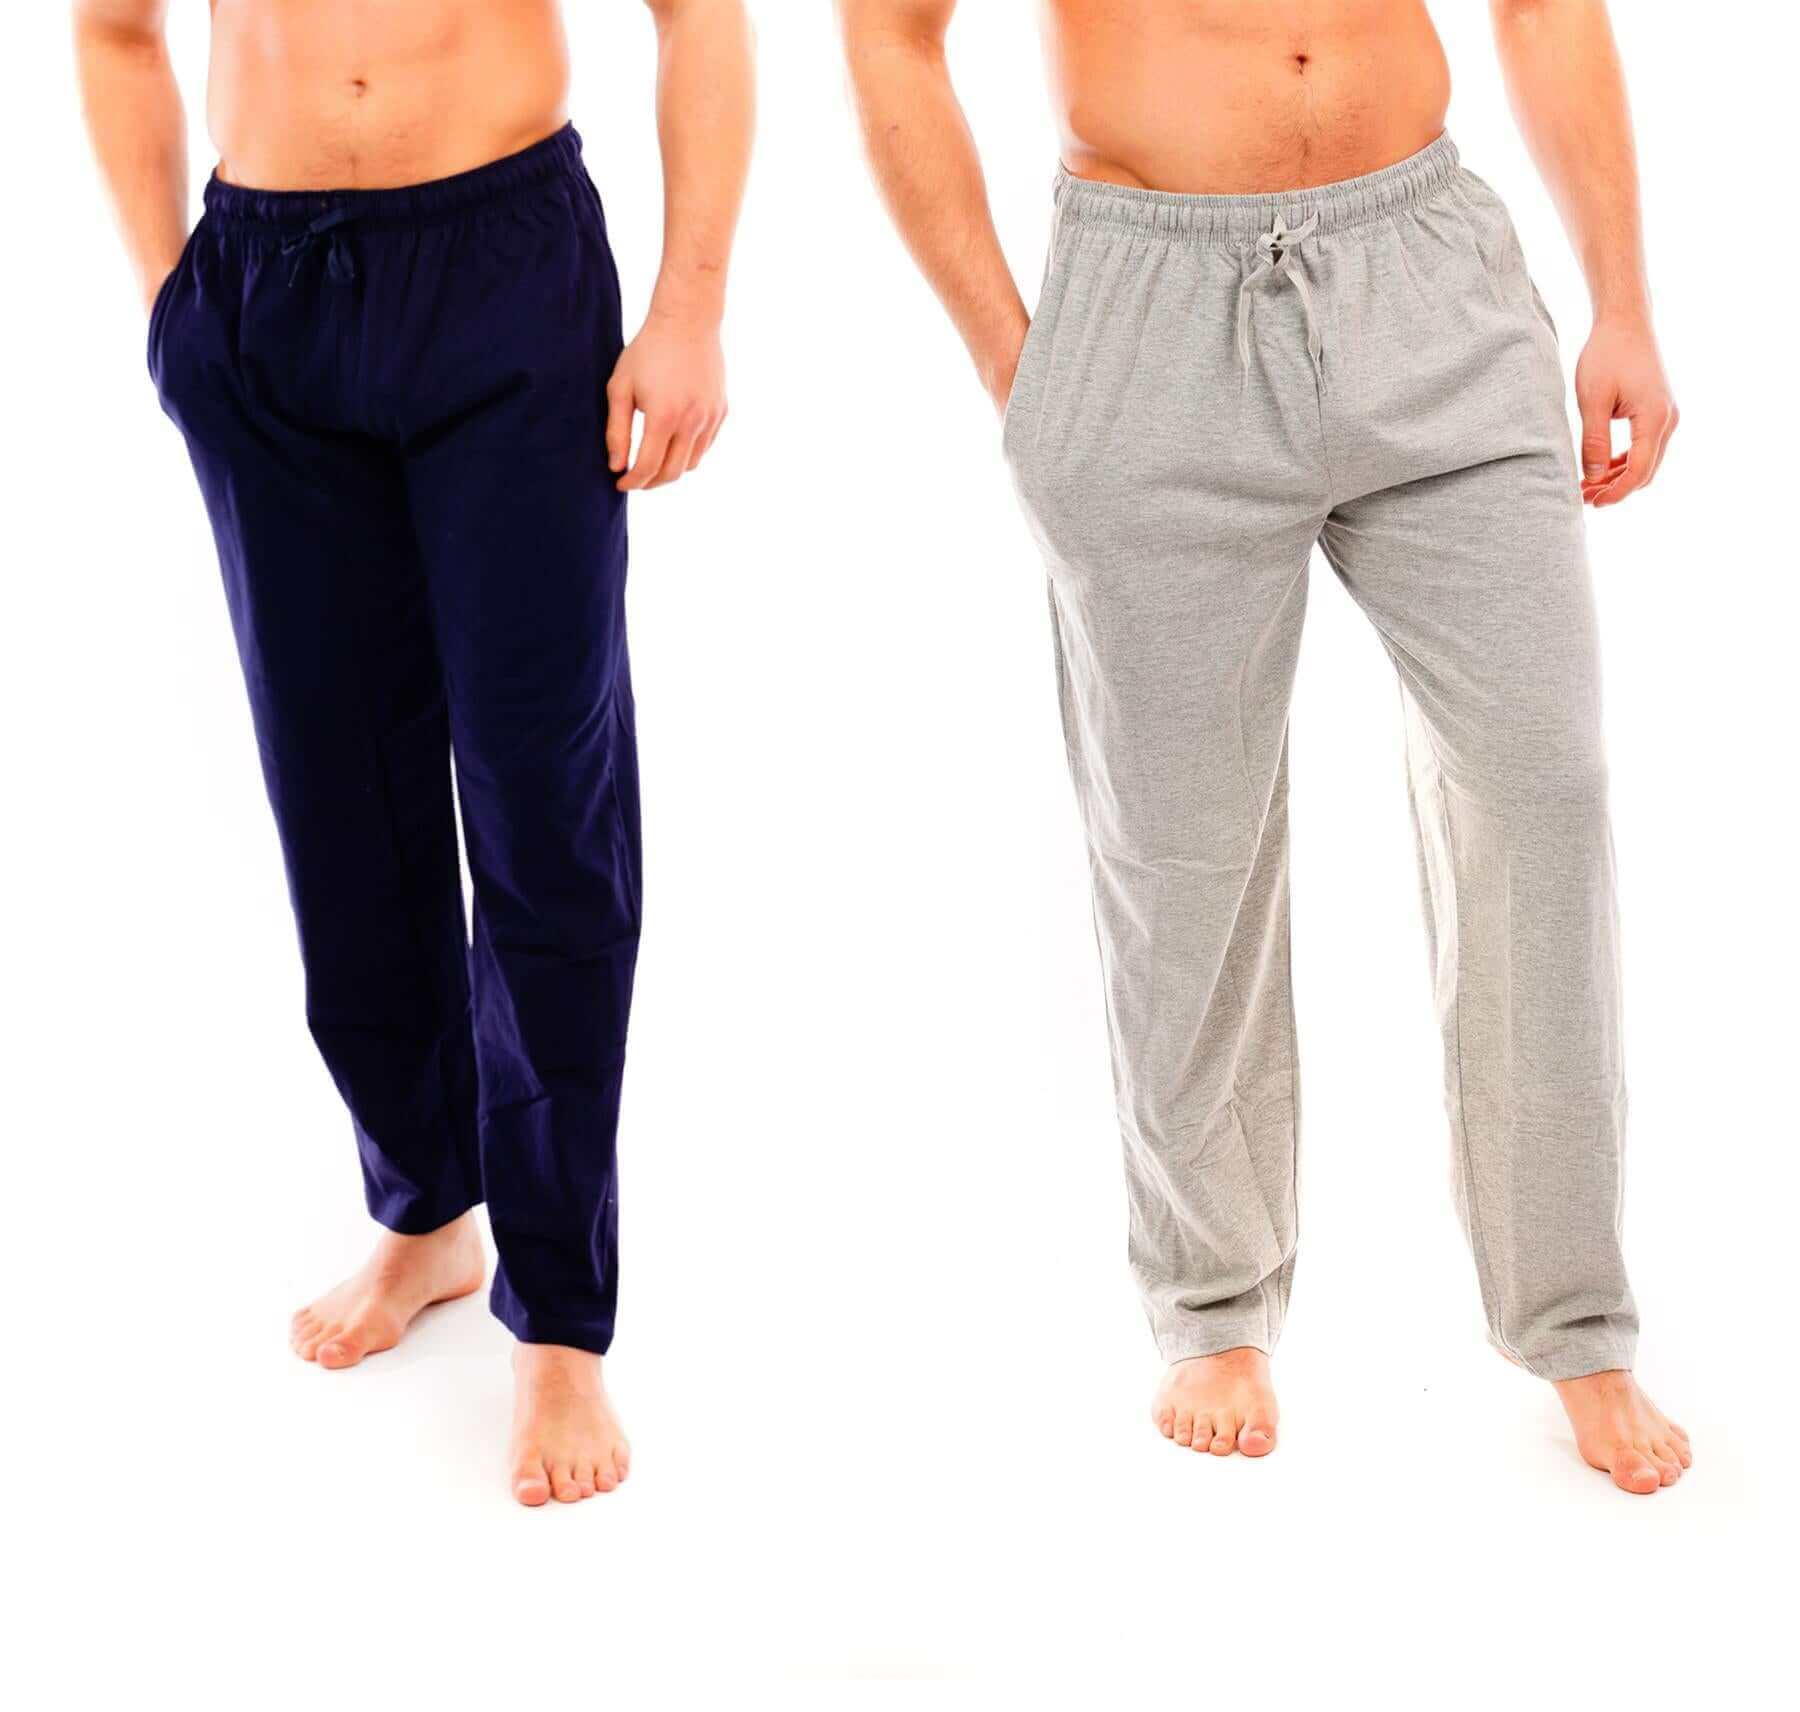 Pack of 2 Men's Lounge Bottoms Pyjama Pants Jersey PJ Bottom. Buy now for £15.00. A Lounge Pant by Sock Stack. 36-39, 3x large, 40-43, 41-44, 44-47, 47-50, 4x large, 50-53, 5x large, athletics, black, bottom, boys, comfortable, cotton, grey, home, jersey,